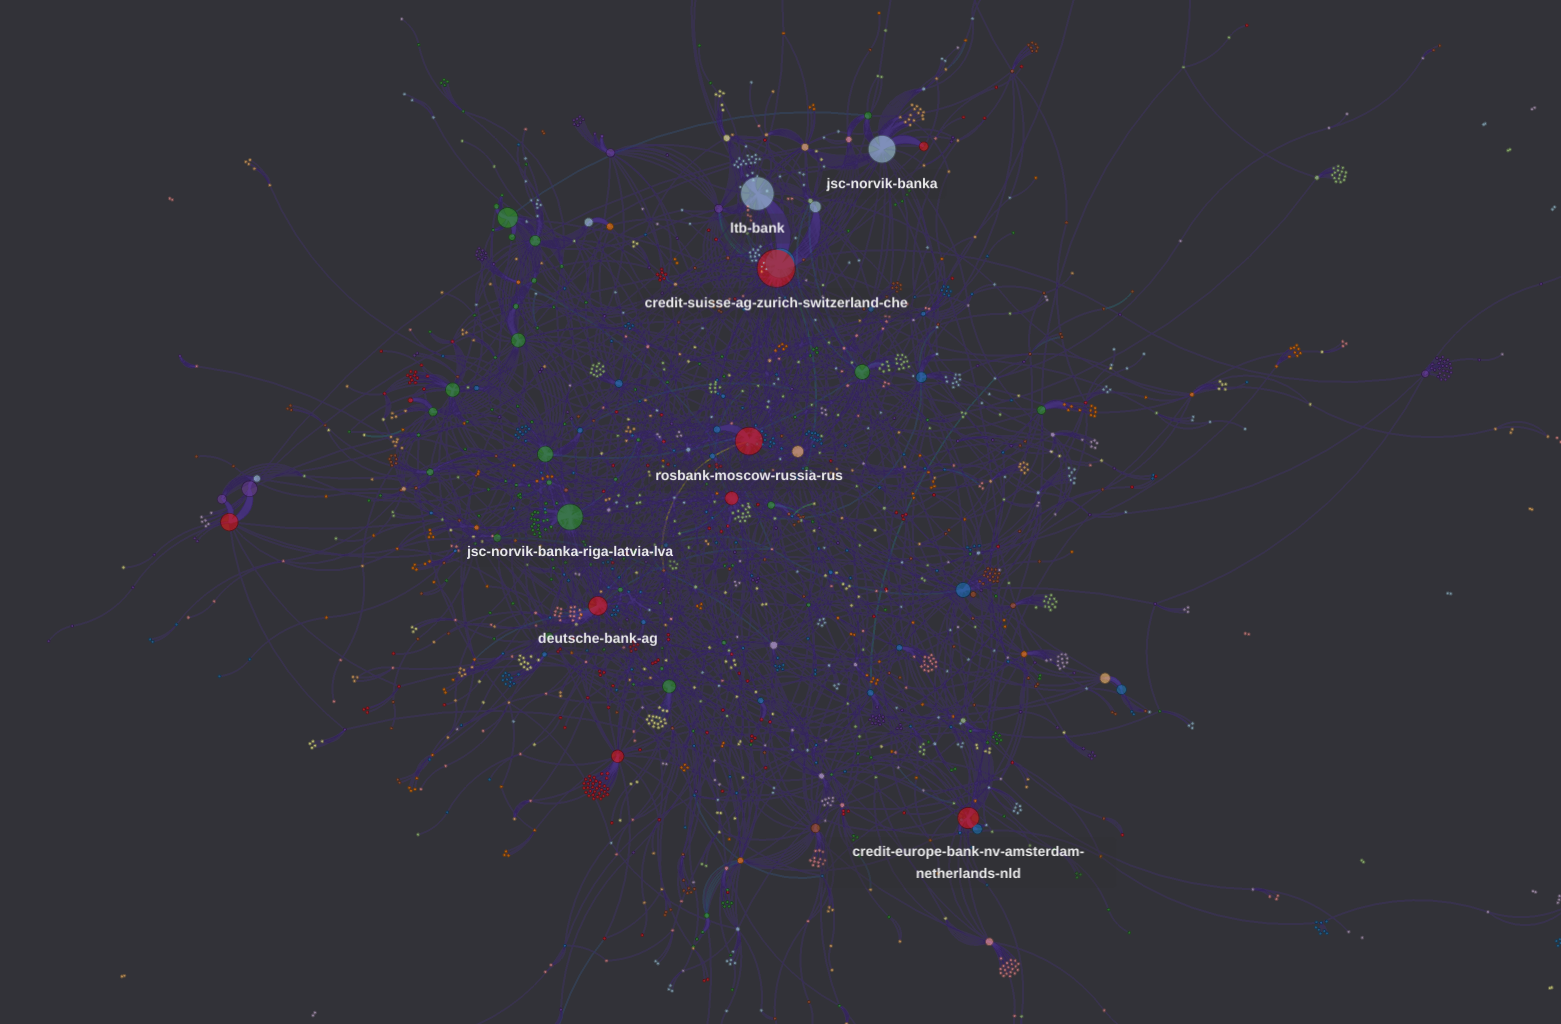 Network graph visualization of the entire graph